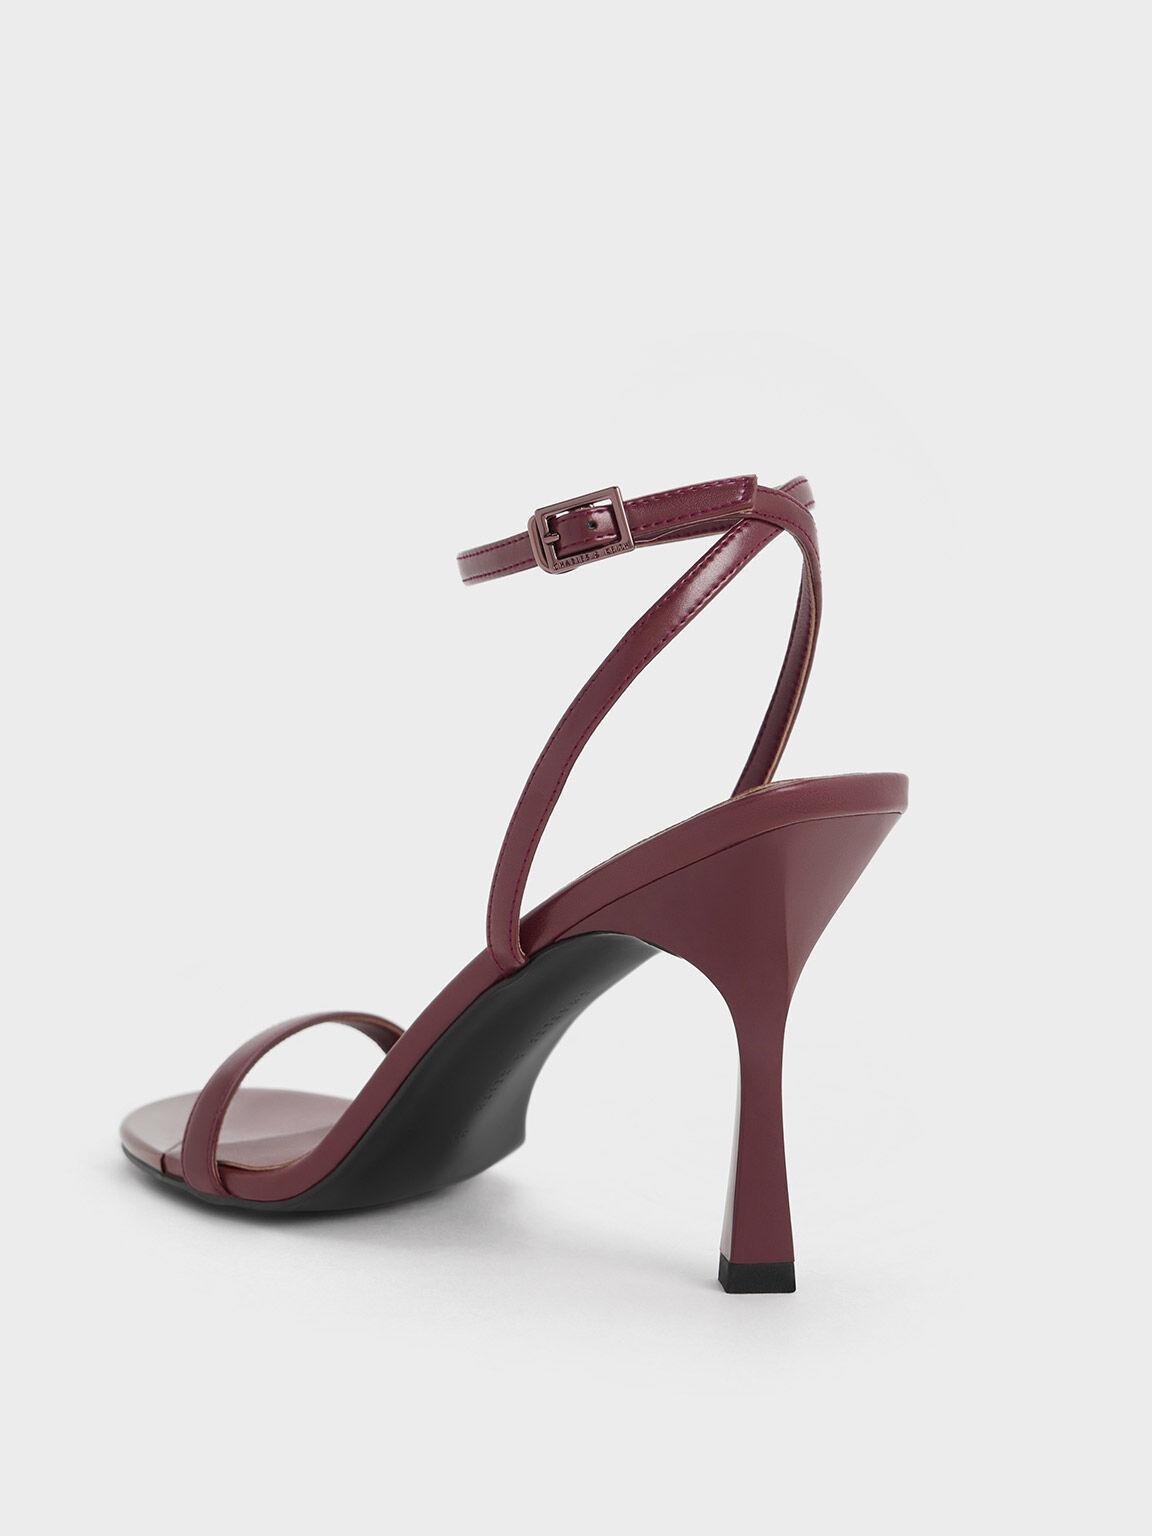 maroon beauty | Heels, Red shoes, Fashion shoes